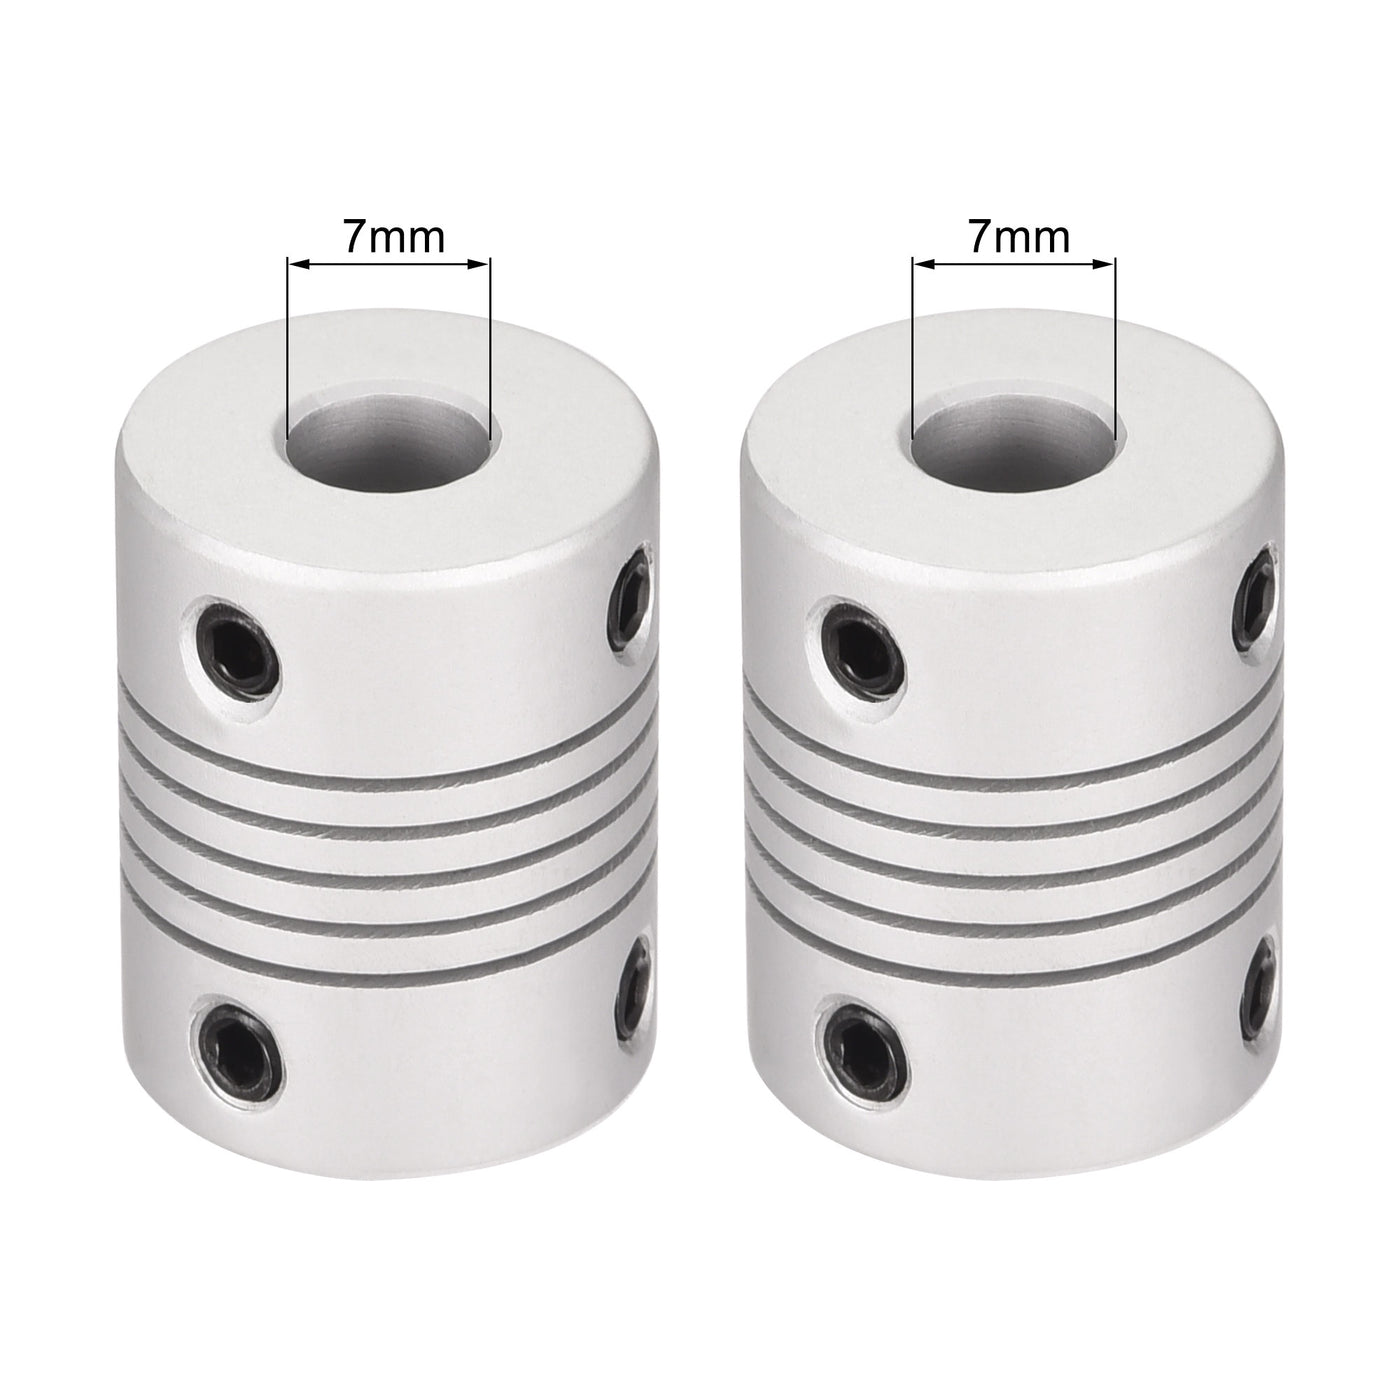 uxcell Uxcell 7mm to 7mm Aluminum Alloy Shaft Coupling Flexible Coupler L25xD19 Silver,5pcs